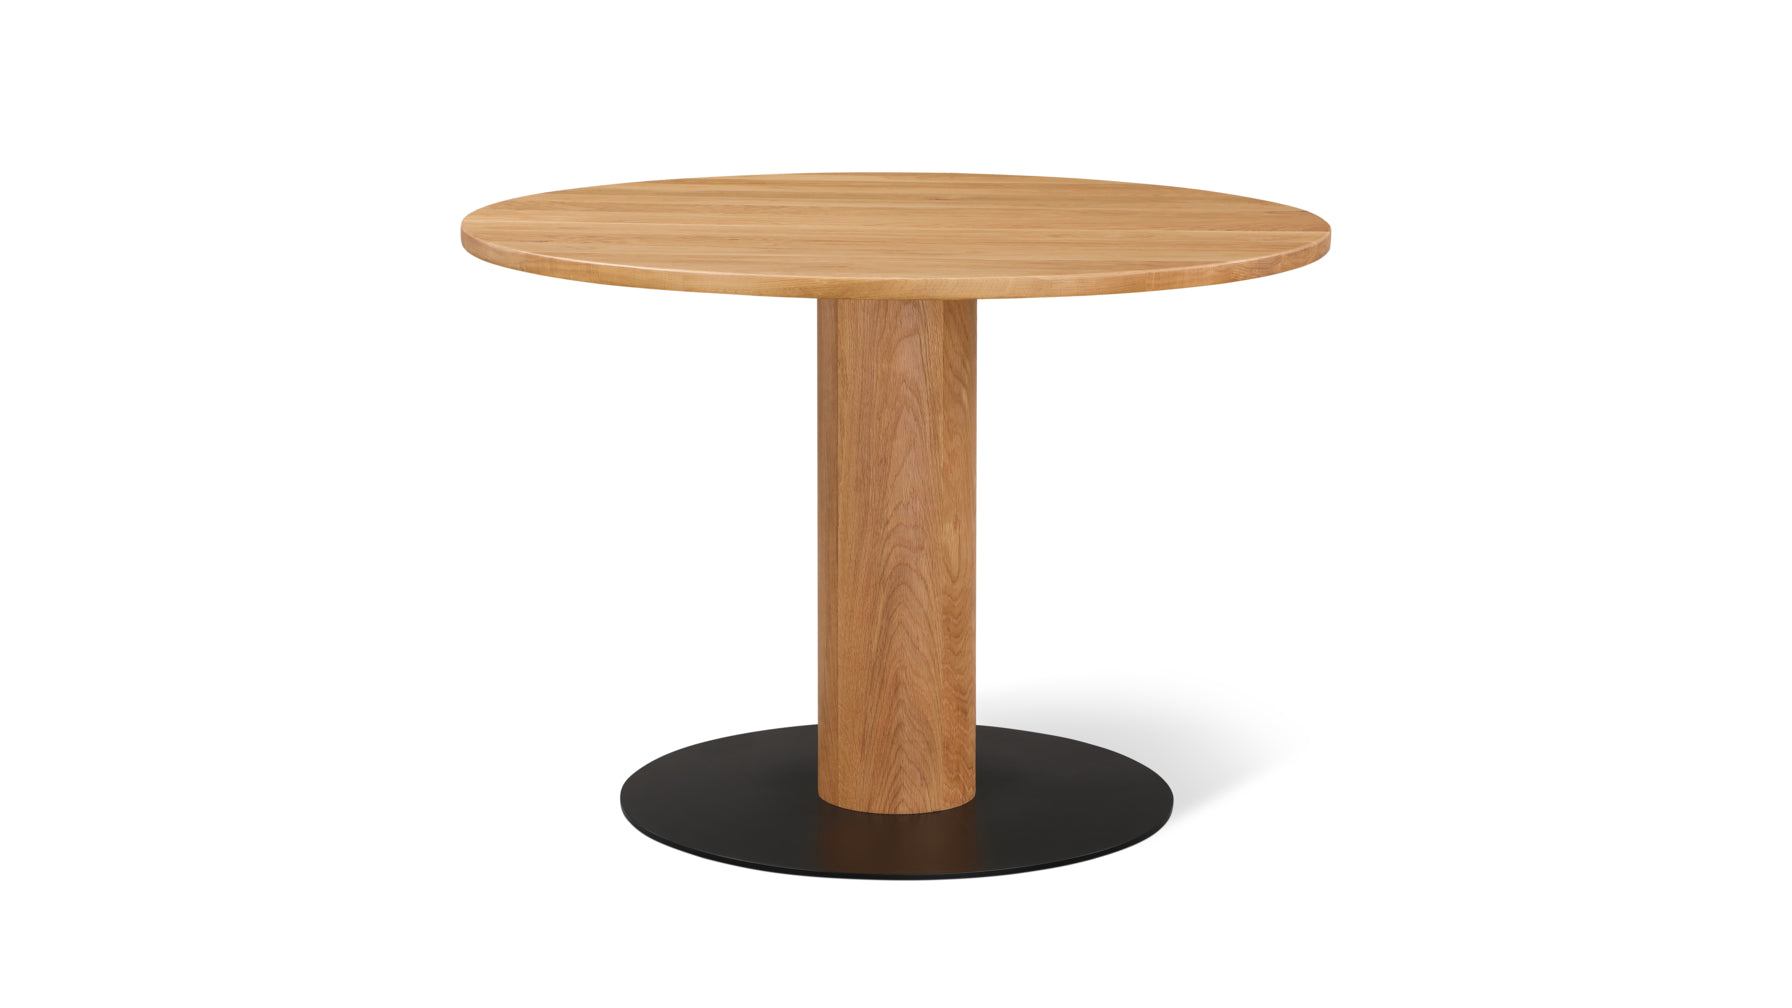 Formation Dining Table, Seats 3-4 People, White Oak - Image 1